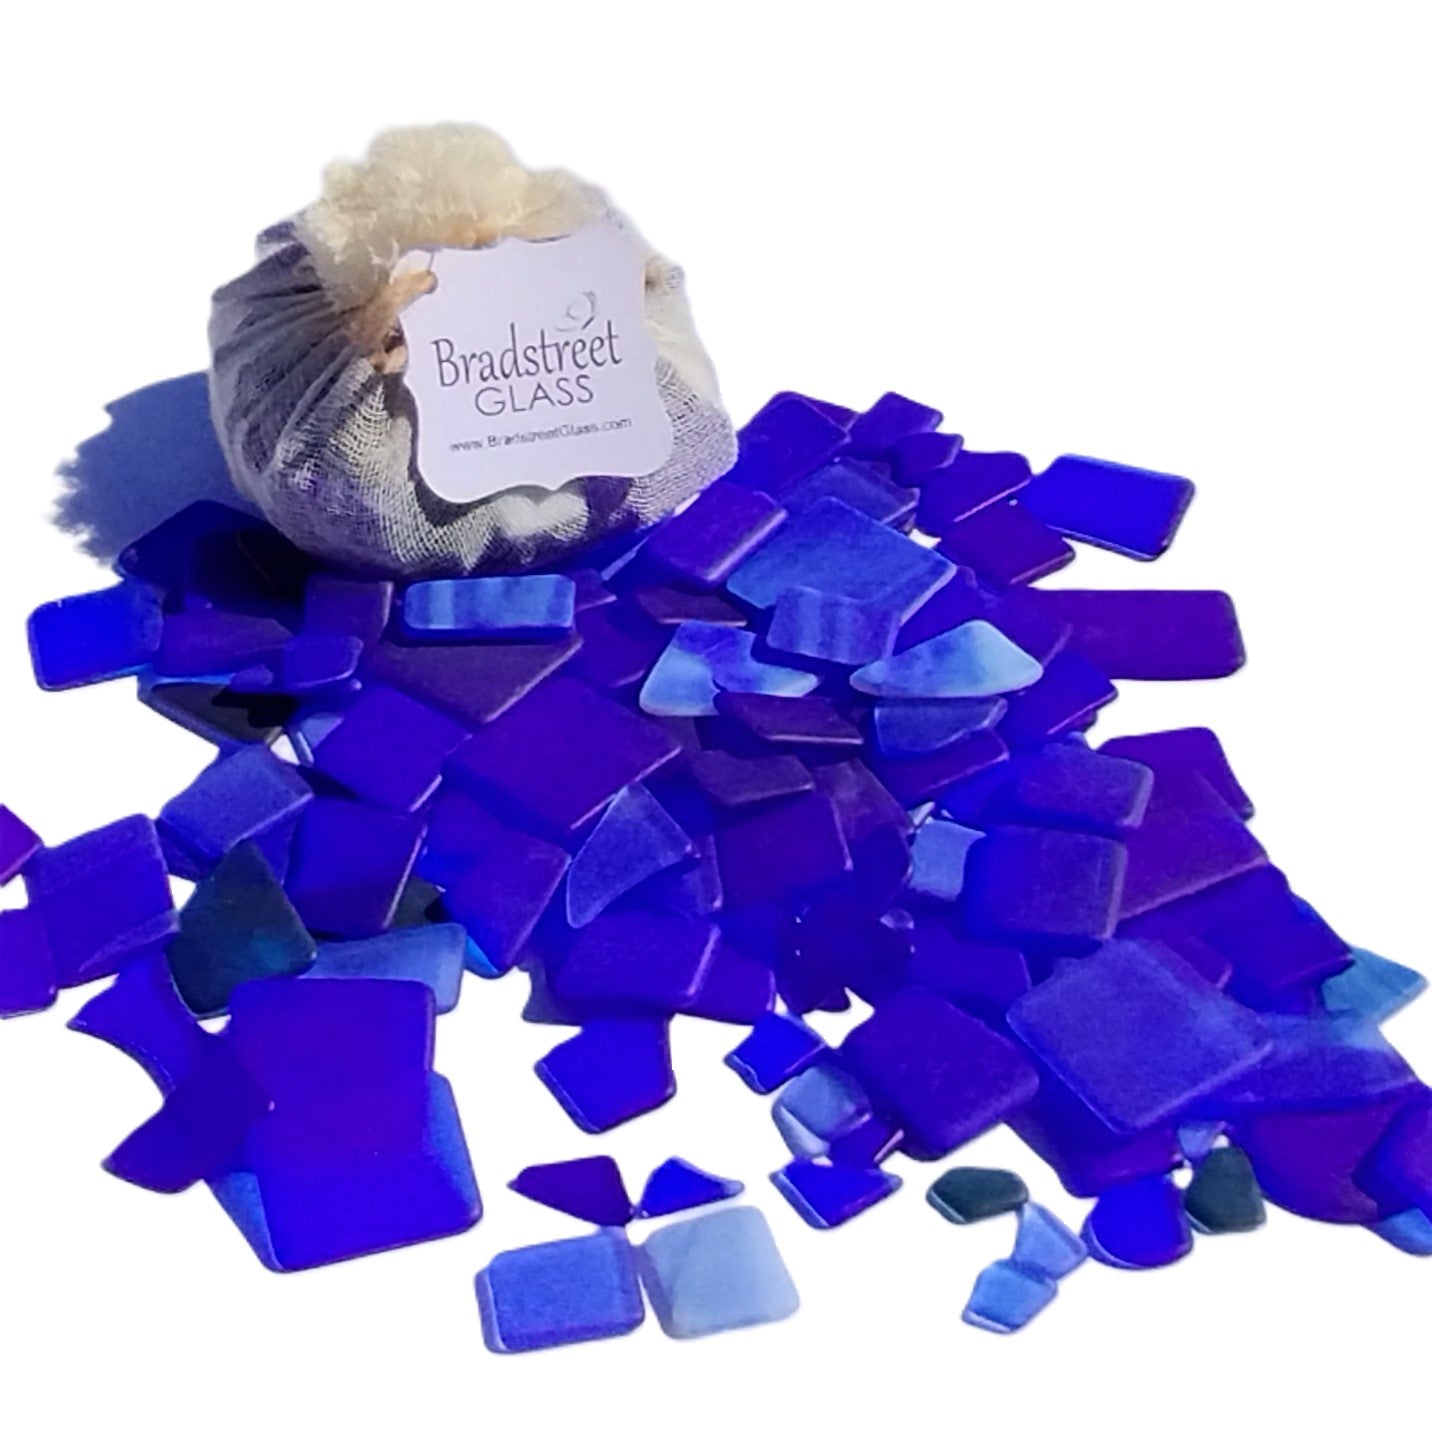 Bradstreet Glass Blue Tumbled Stained Glass 1/2 pound "Sea Glass" in Shades of Blue